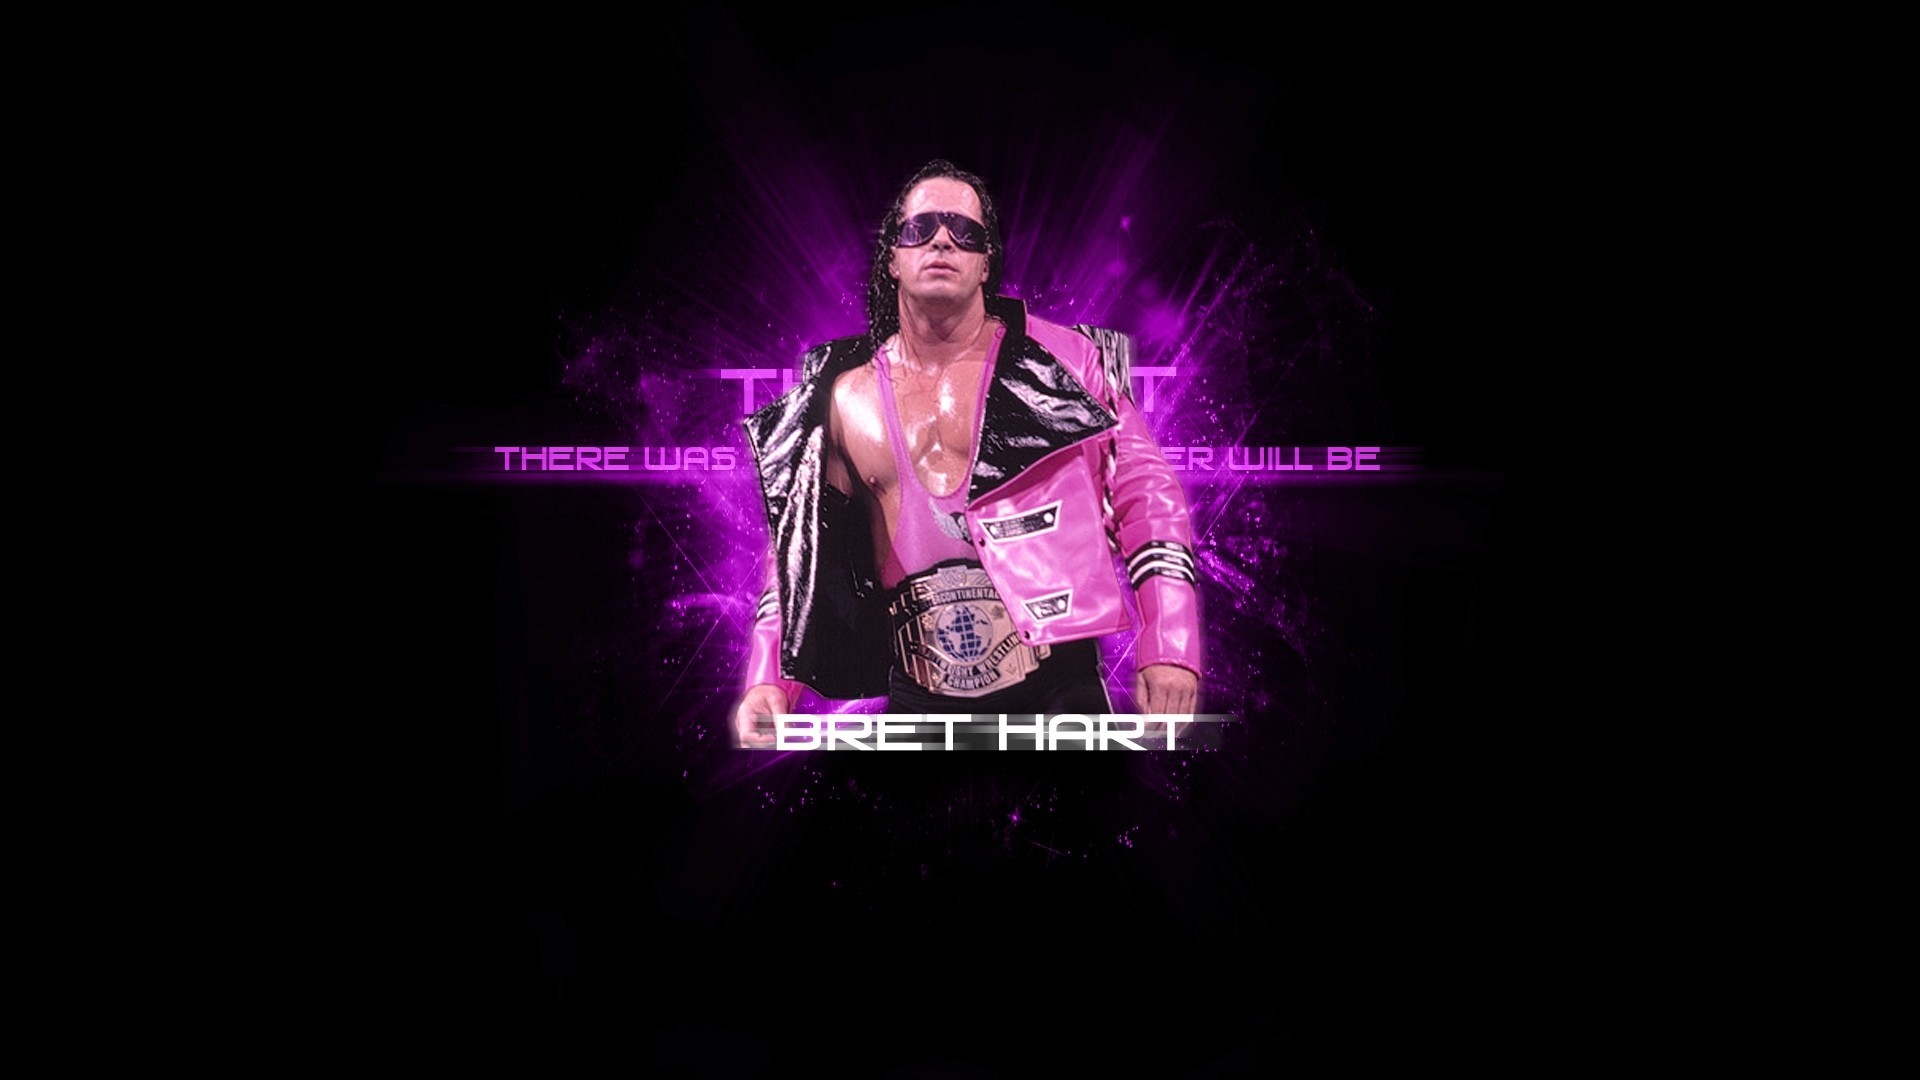 Can someone turn this Bret Hart image into a useable wallpaper Ive been  nostalgic for 90s wrestling lately  riphonewallpapers